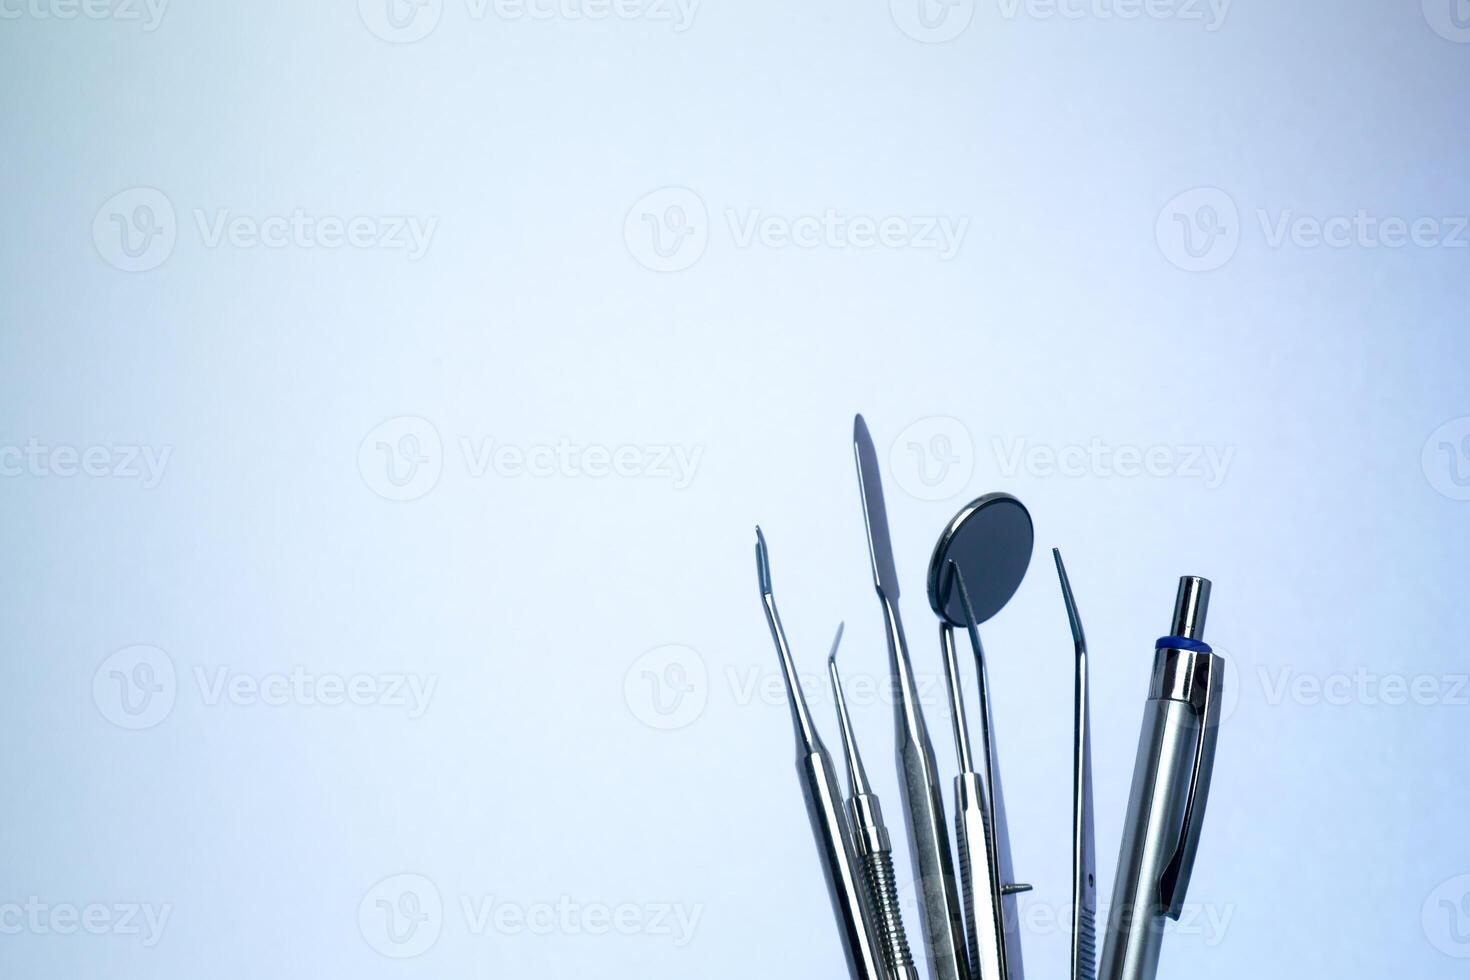 Dental instruments collection isolated on blue background photo